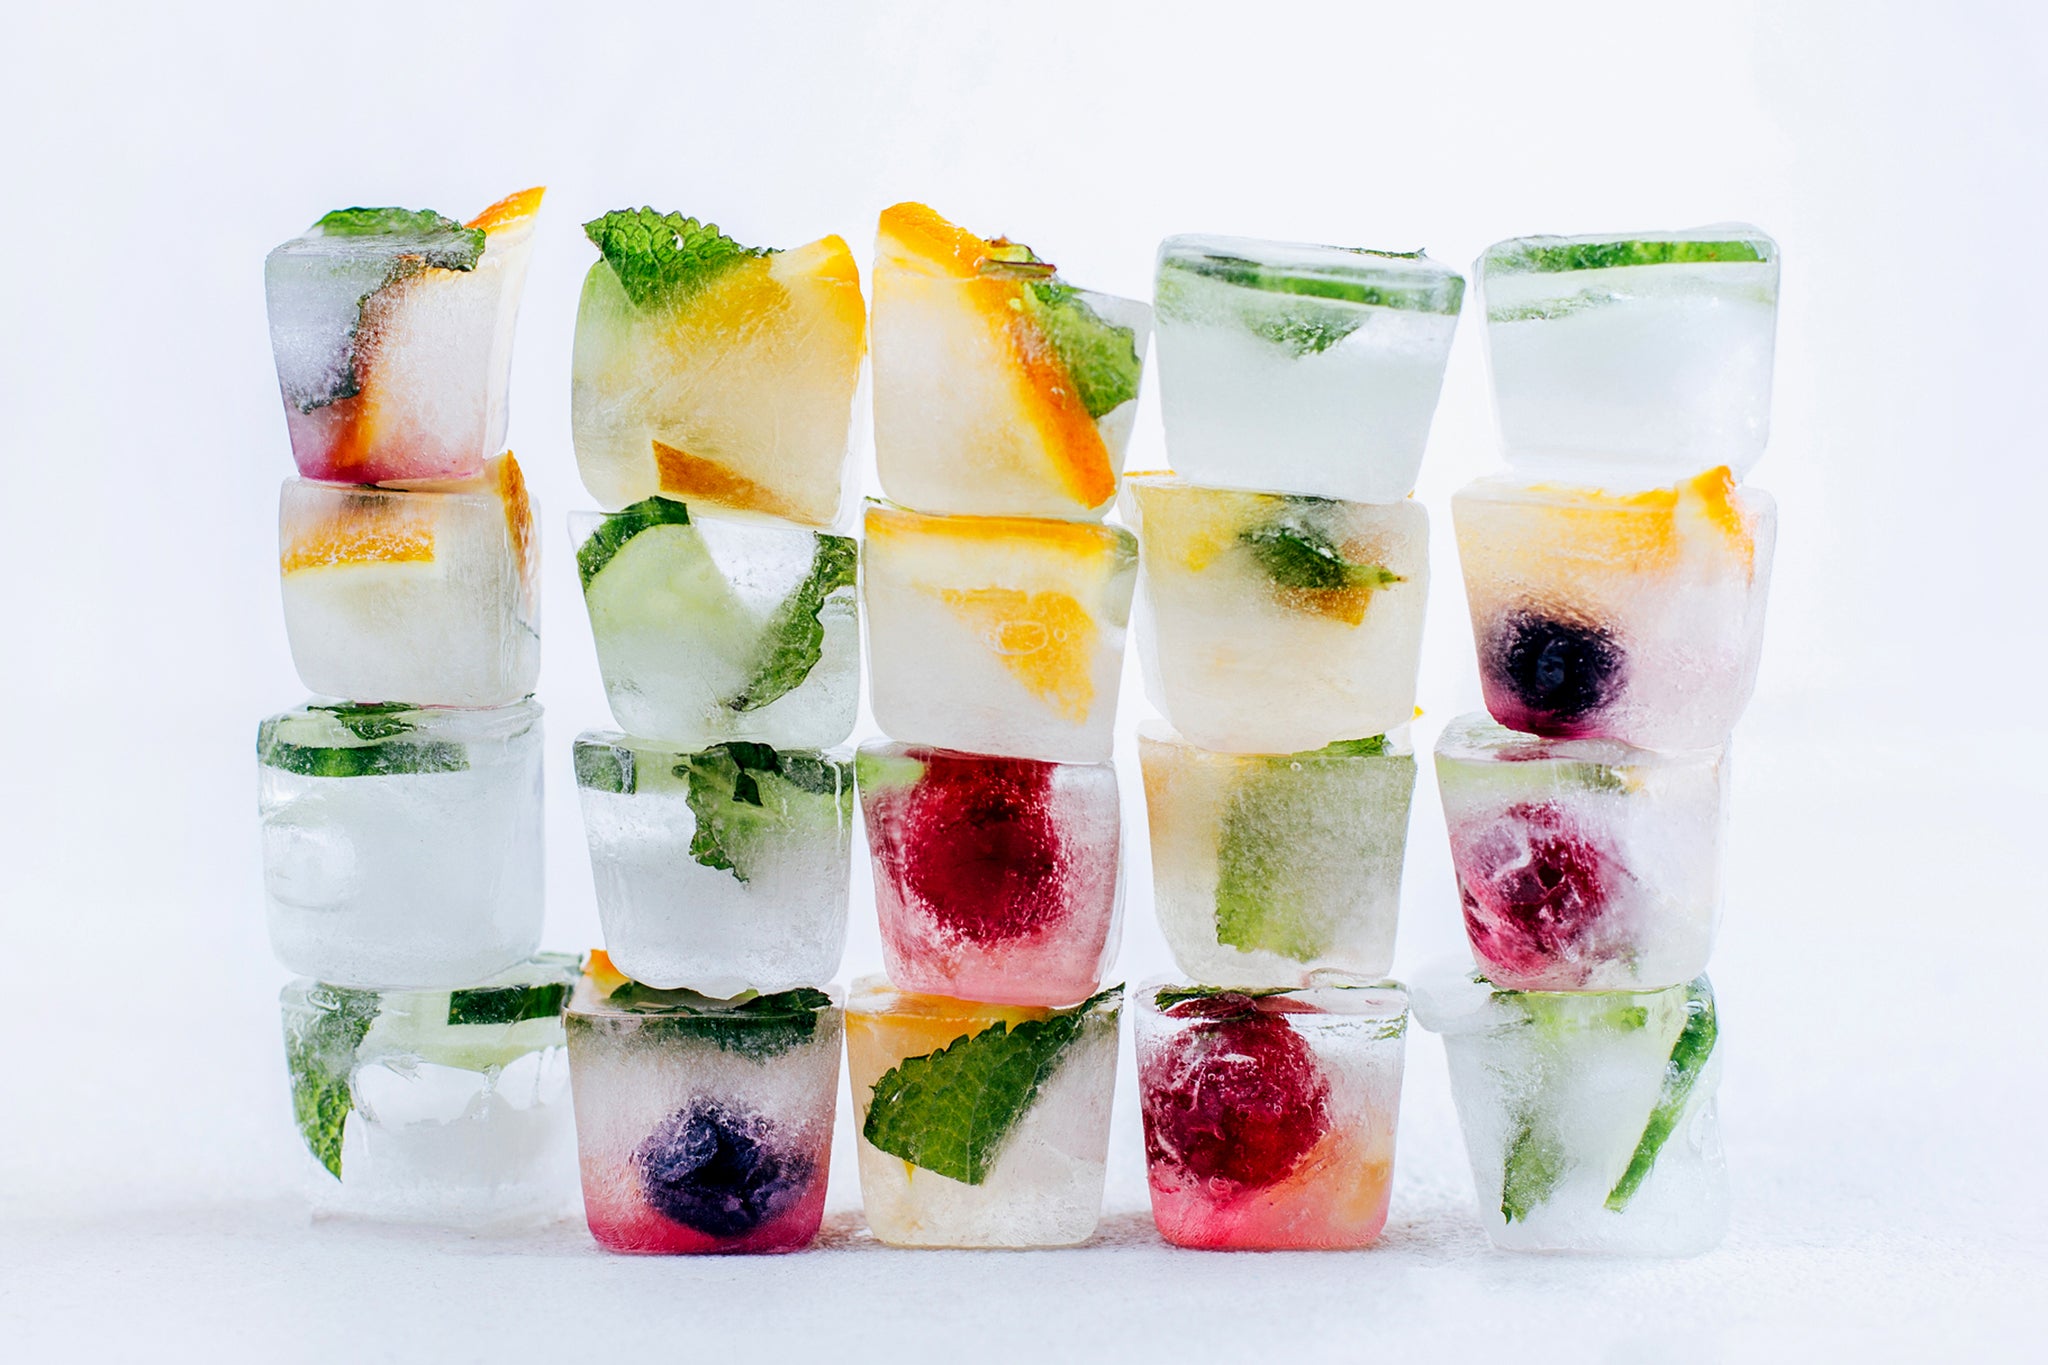 Ice cube trays aren’t just for ice